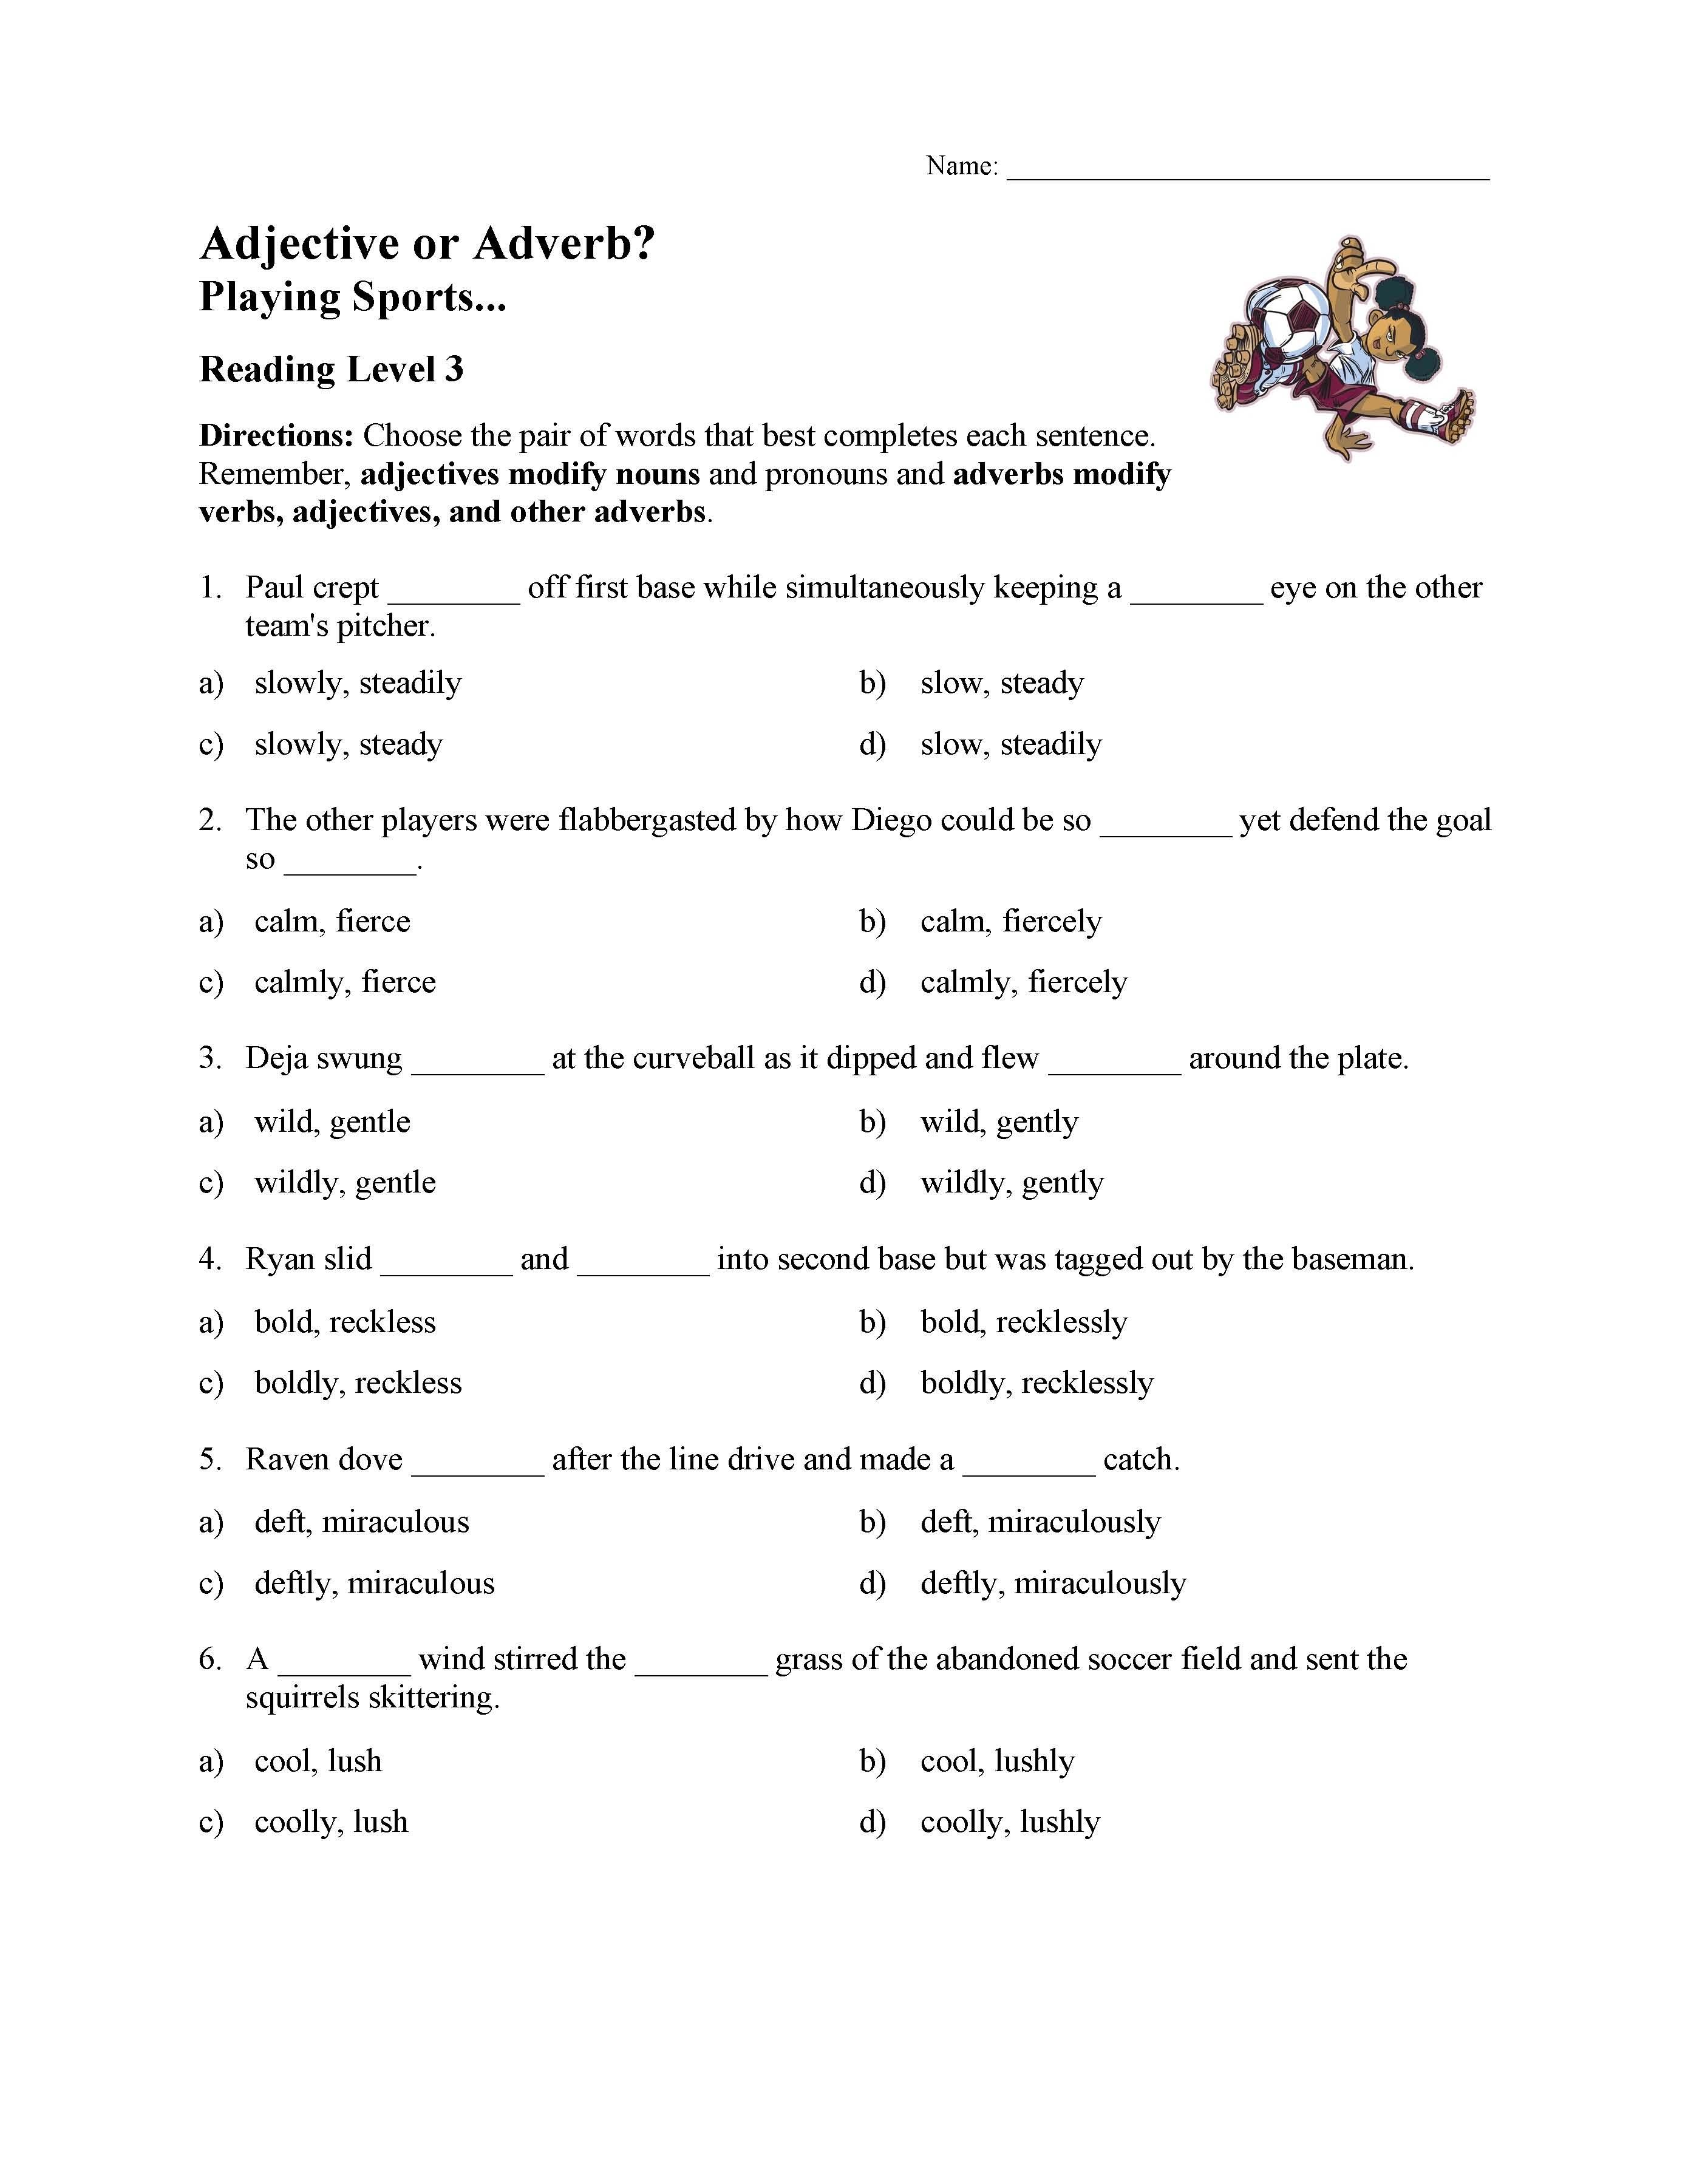 Adverbs And Adjectives Worksheet Answers Adjectives And Adverbs With Magical Horses Worksheet